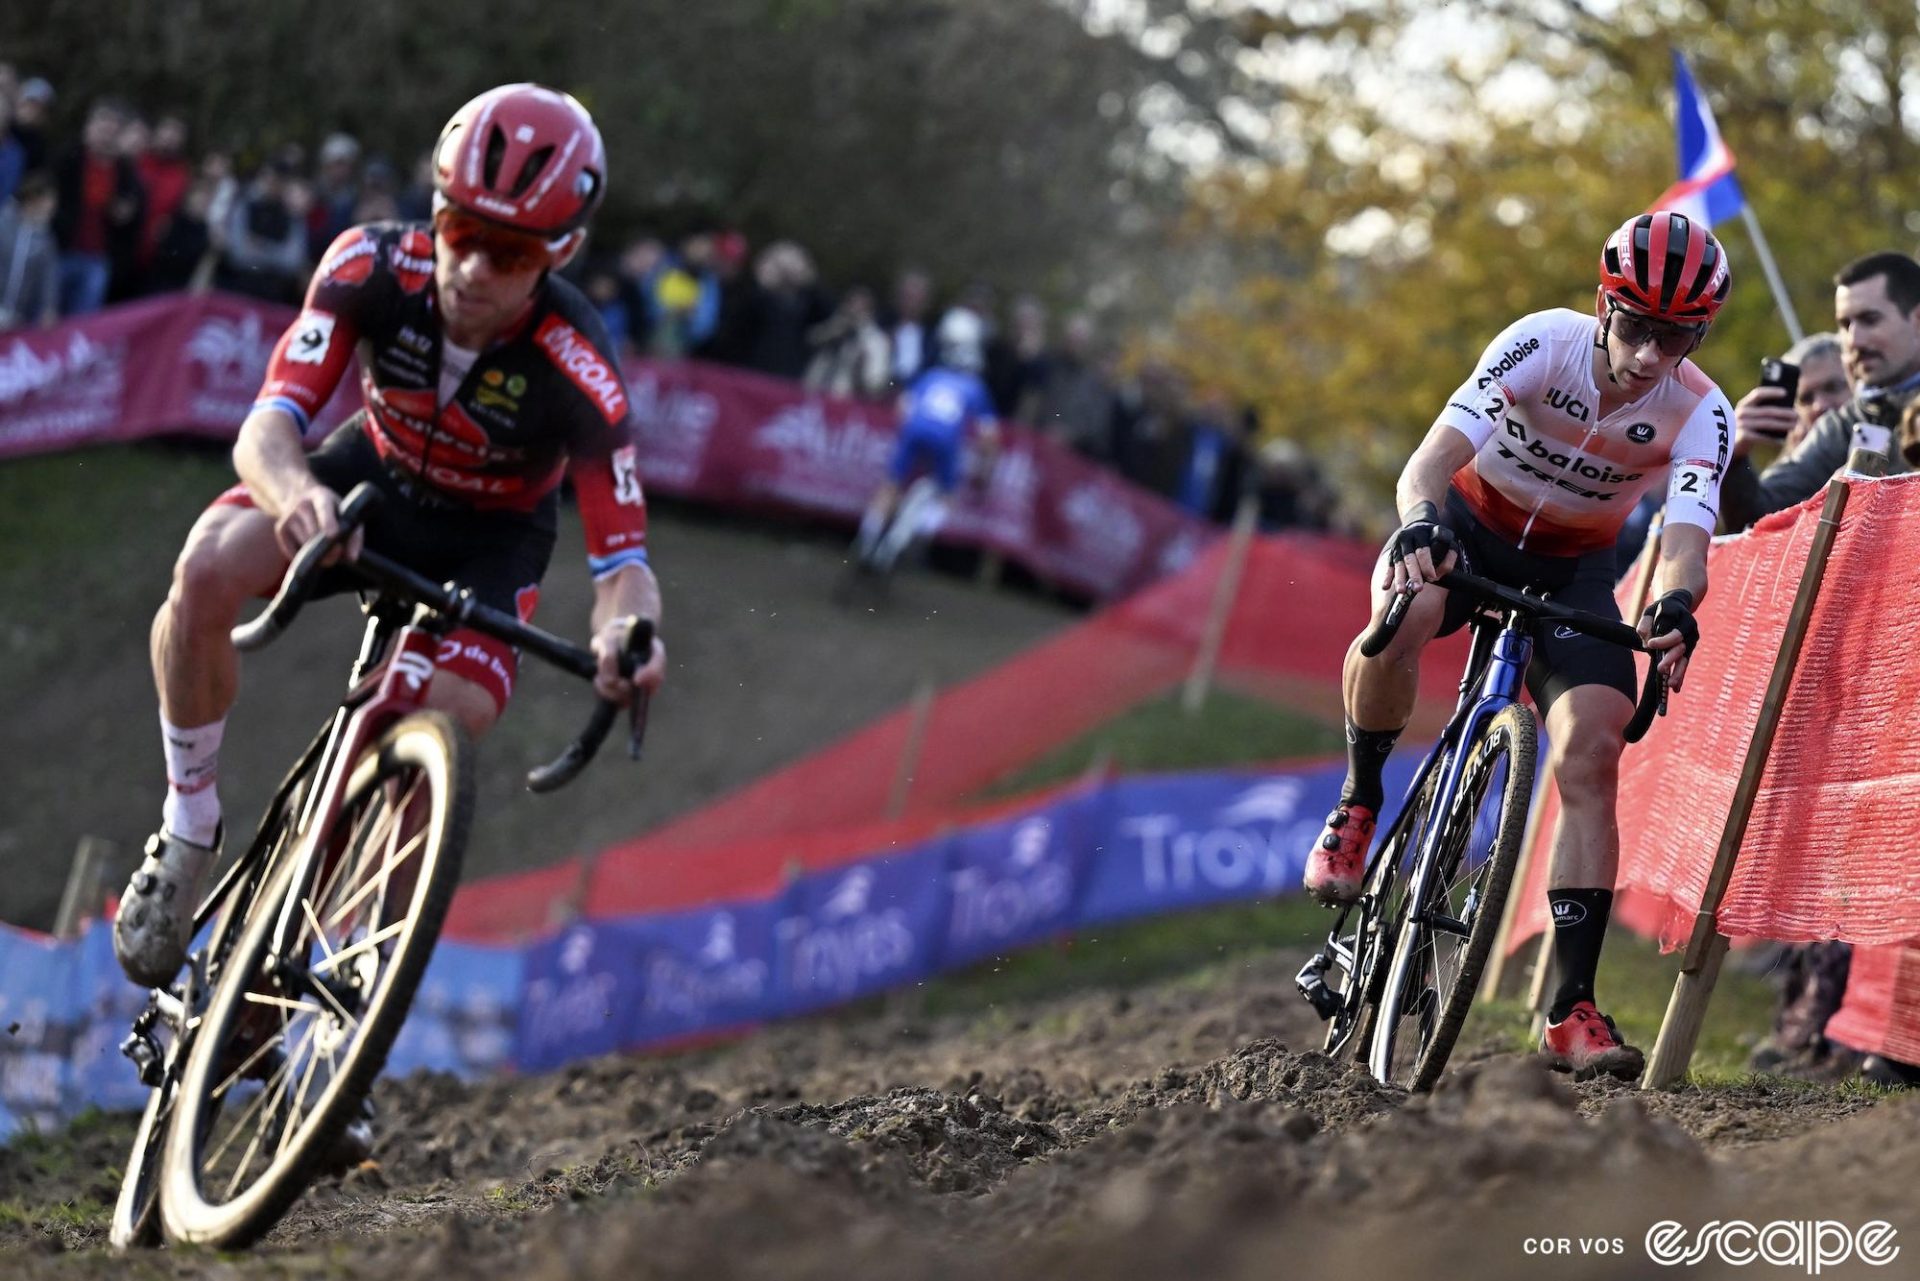 Eli Iserbyt and Lars van der Haar fight the off-camber section to stay up right. Eli, in front, is slightly out of focus as he leans his bike into the hill, while Van der Haar, behind, is sharply in focus as he puts a foot down for balance.